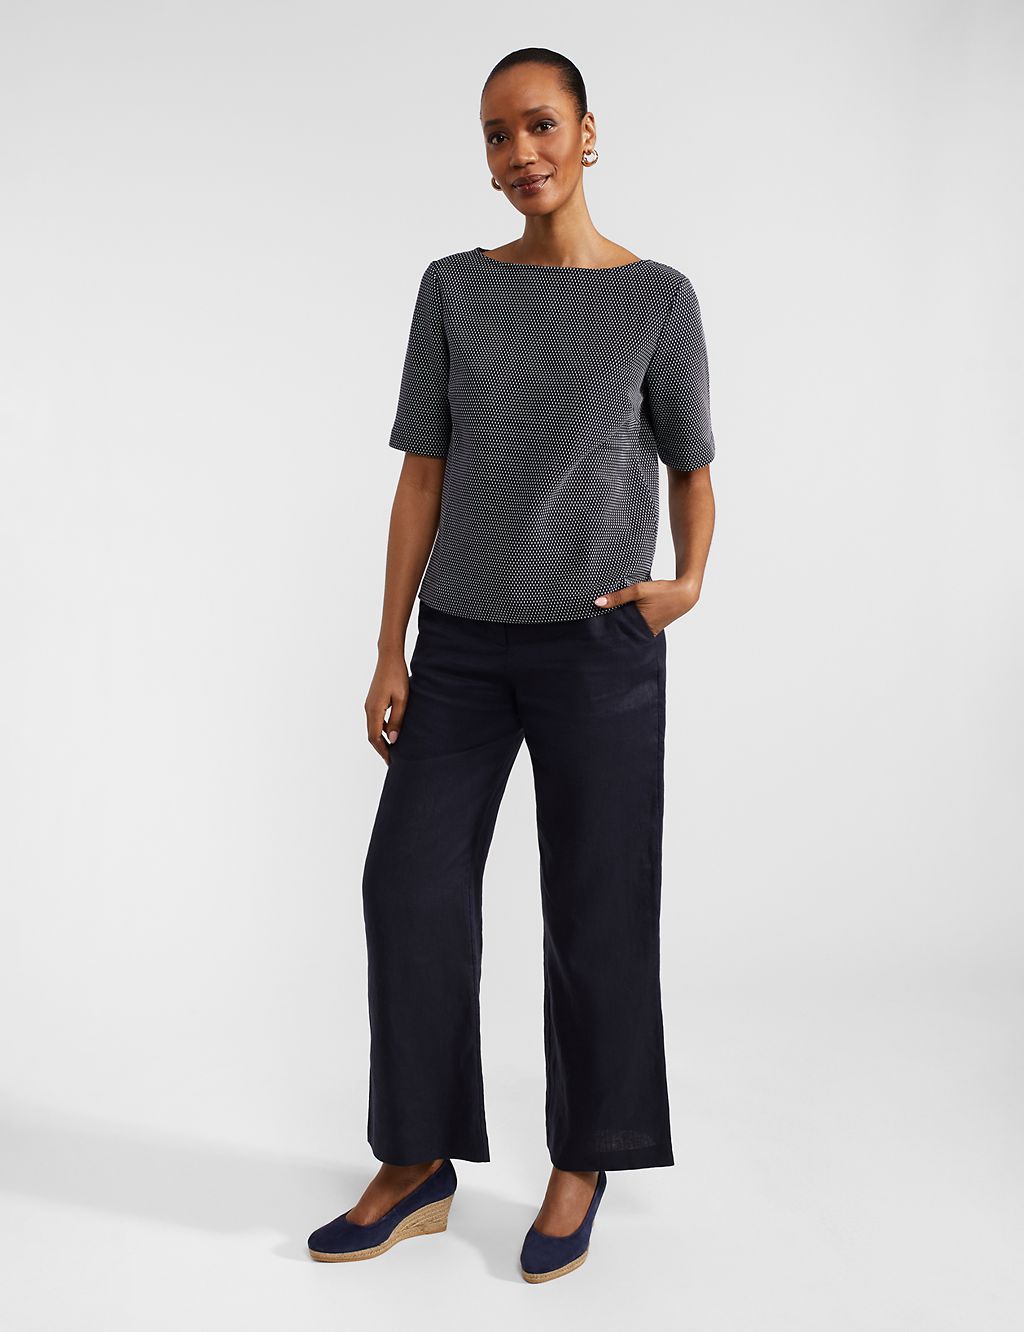 Cotton Rich Textured Top 5 of 6